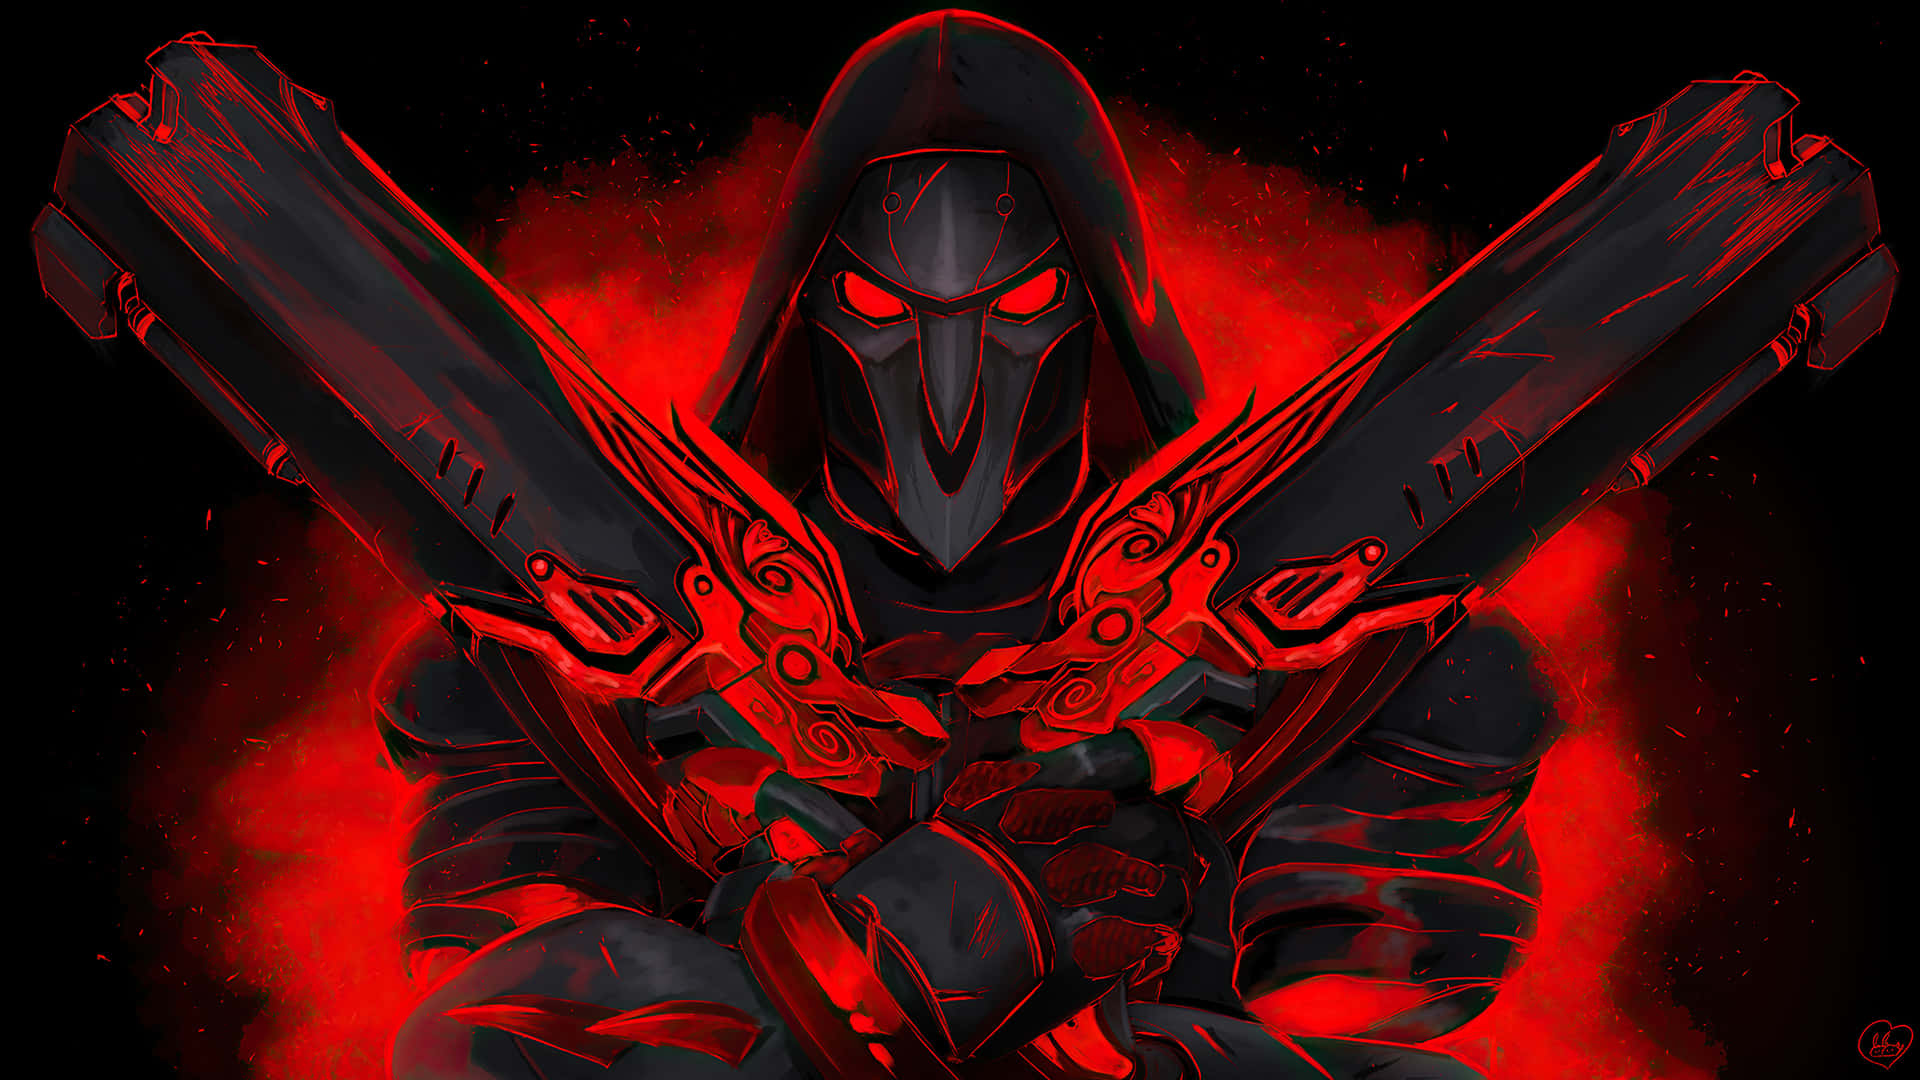 The Reaper, a relentless force in Overwatch Wallpaper